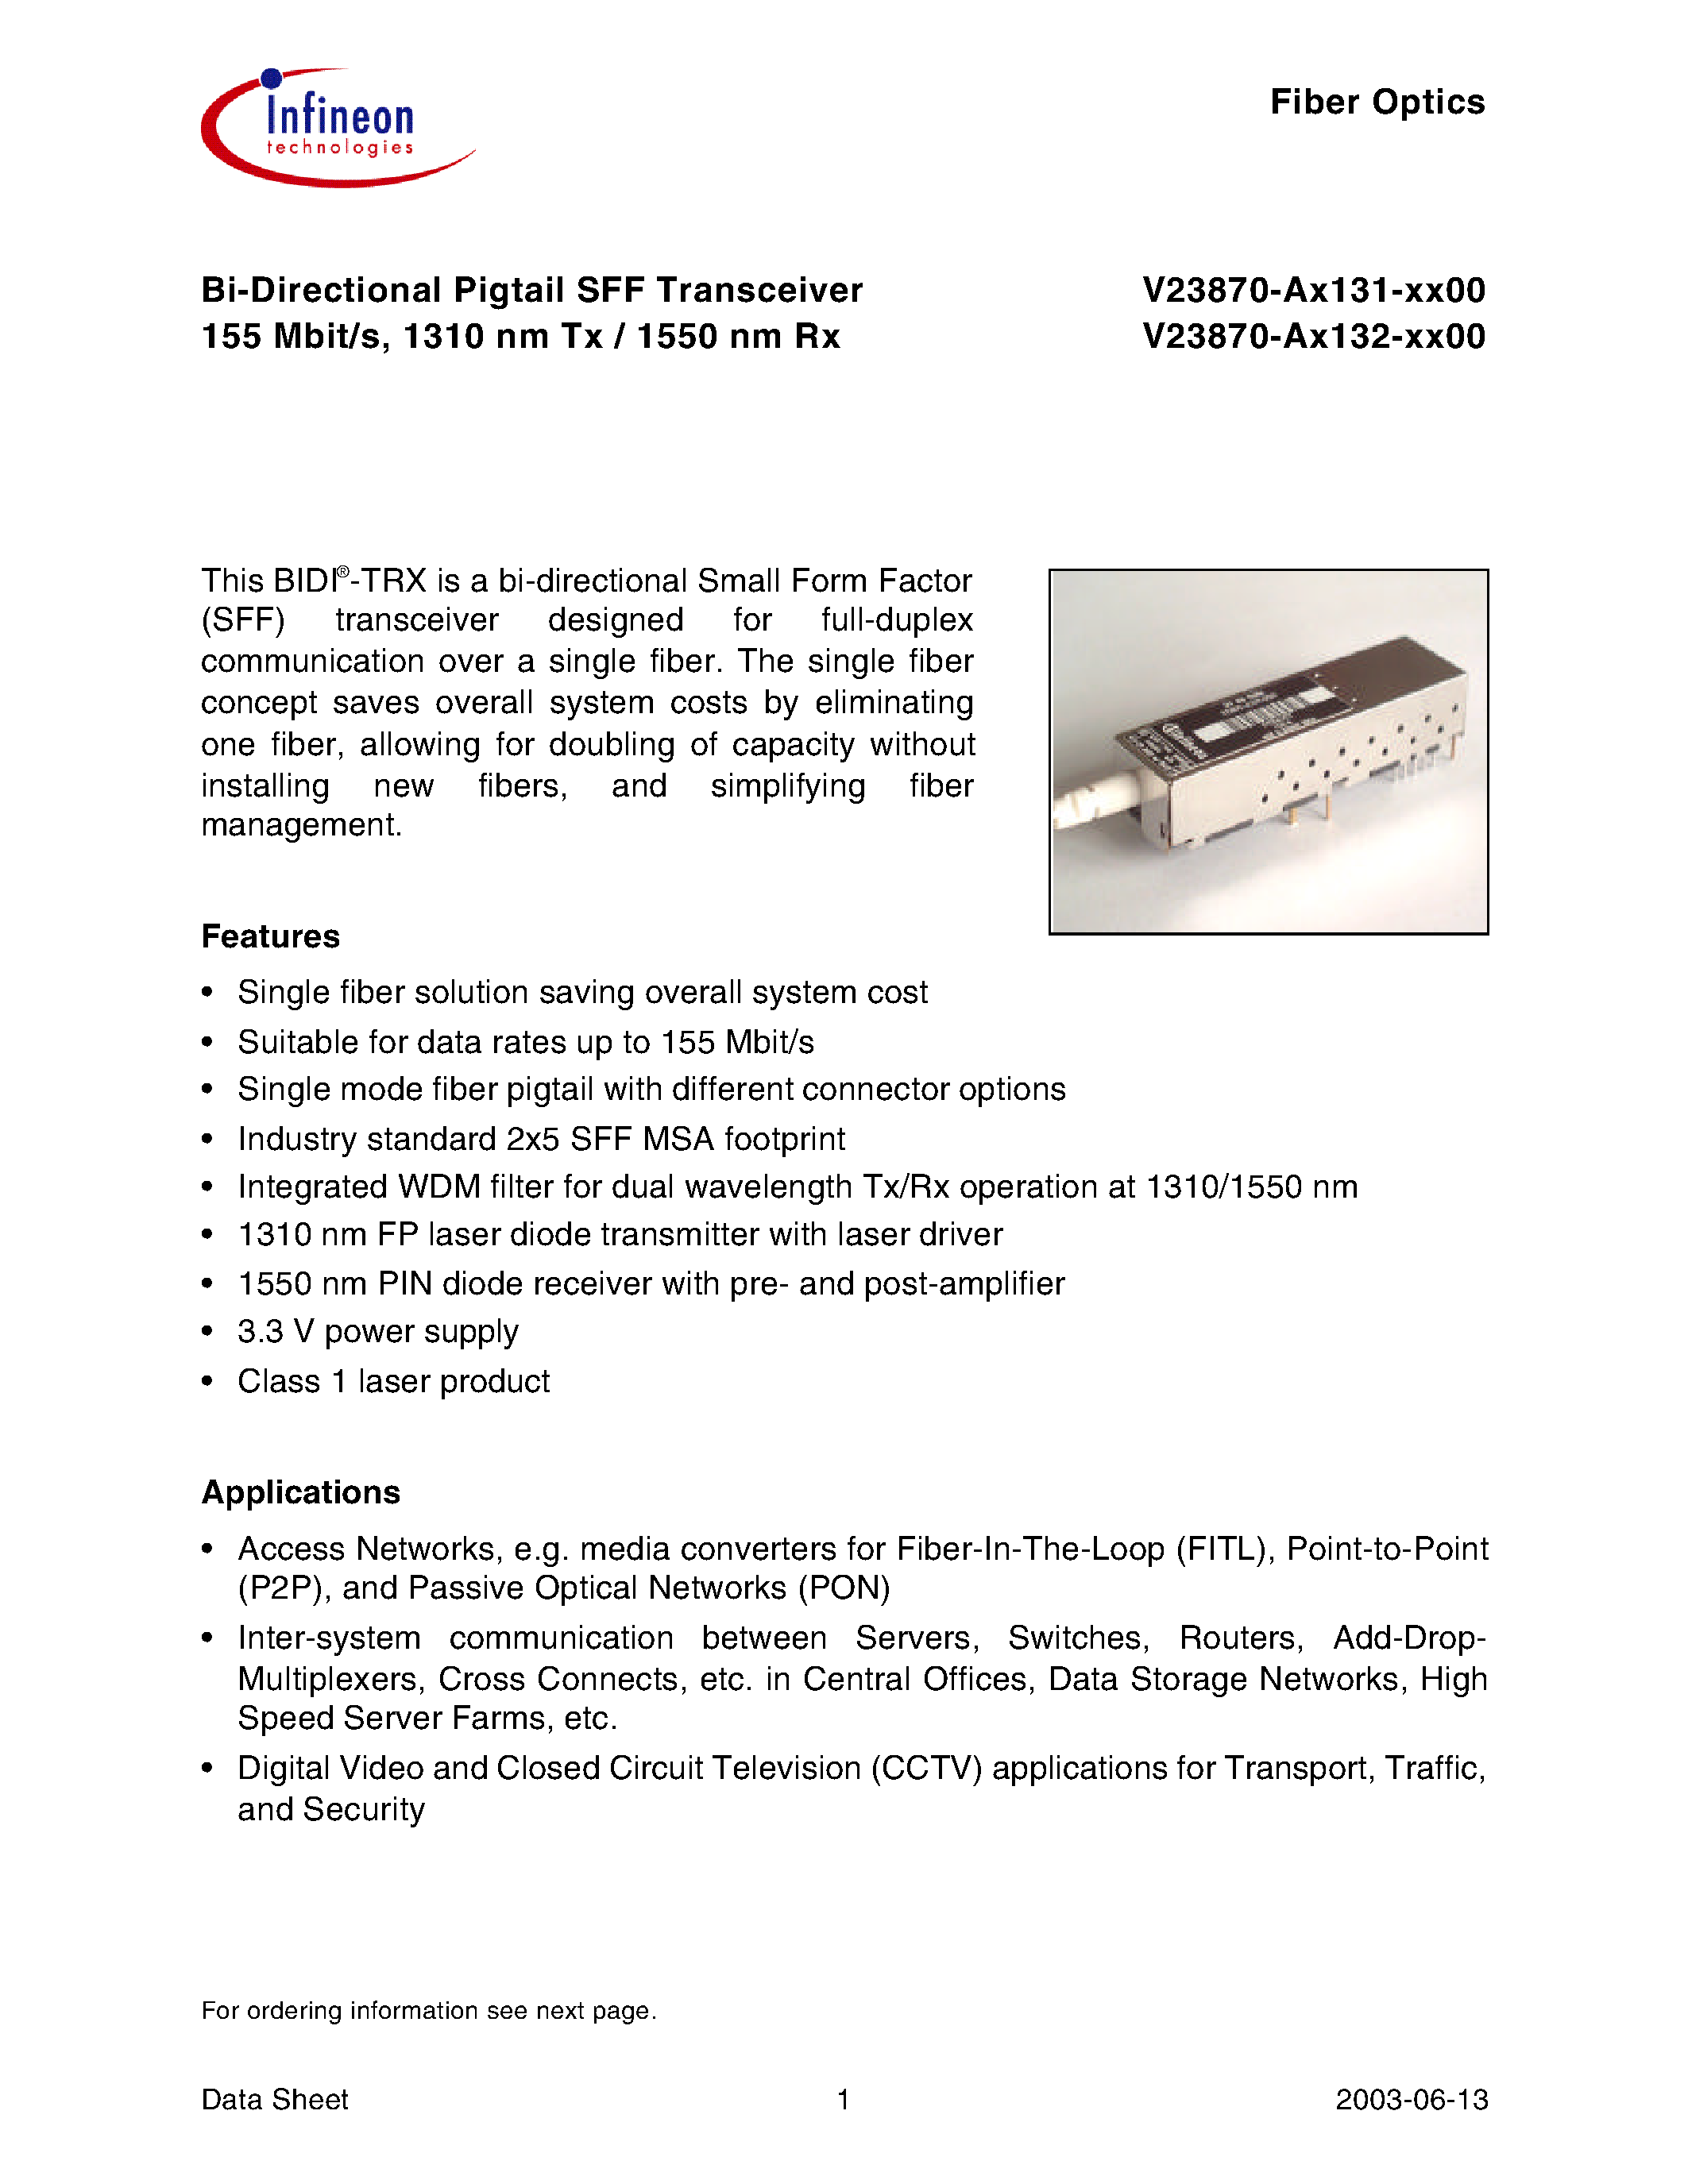 Datasheet V23870-A3131-A500 - Bi-Directional Pigtail SFF Transceiver 155 Mbit/s/ 1310 nm Tx / 1550 nm Rx page 1